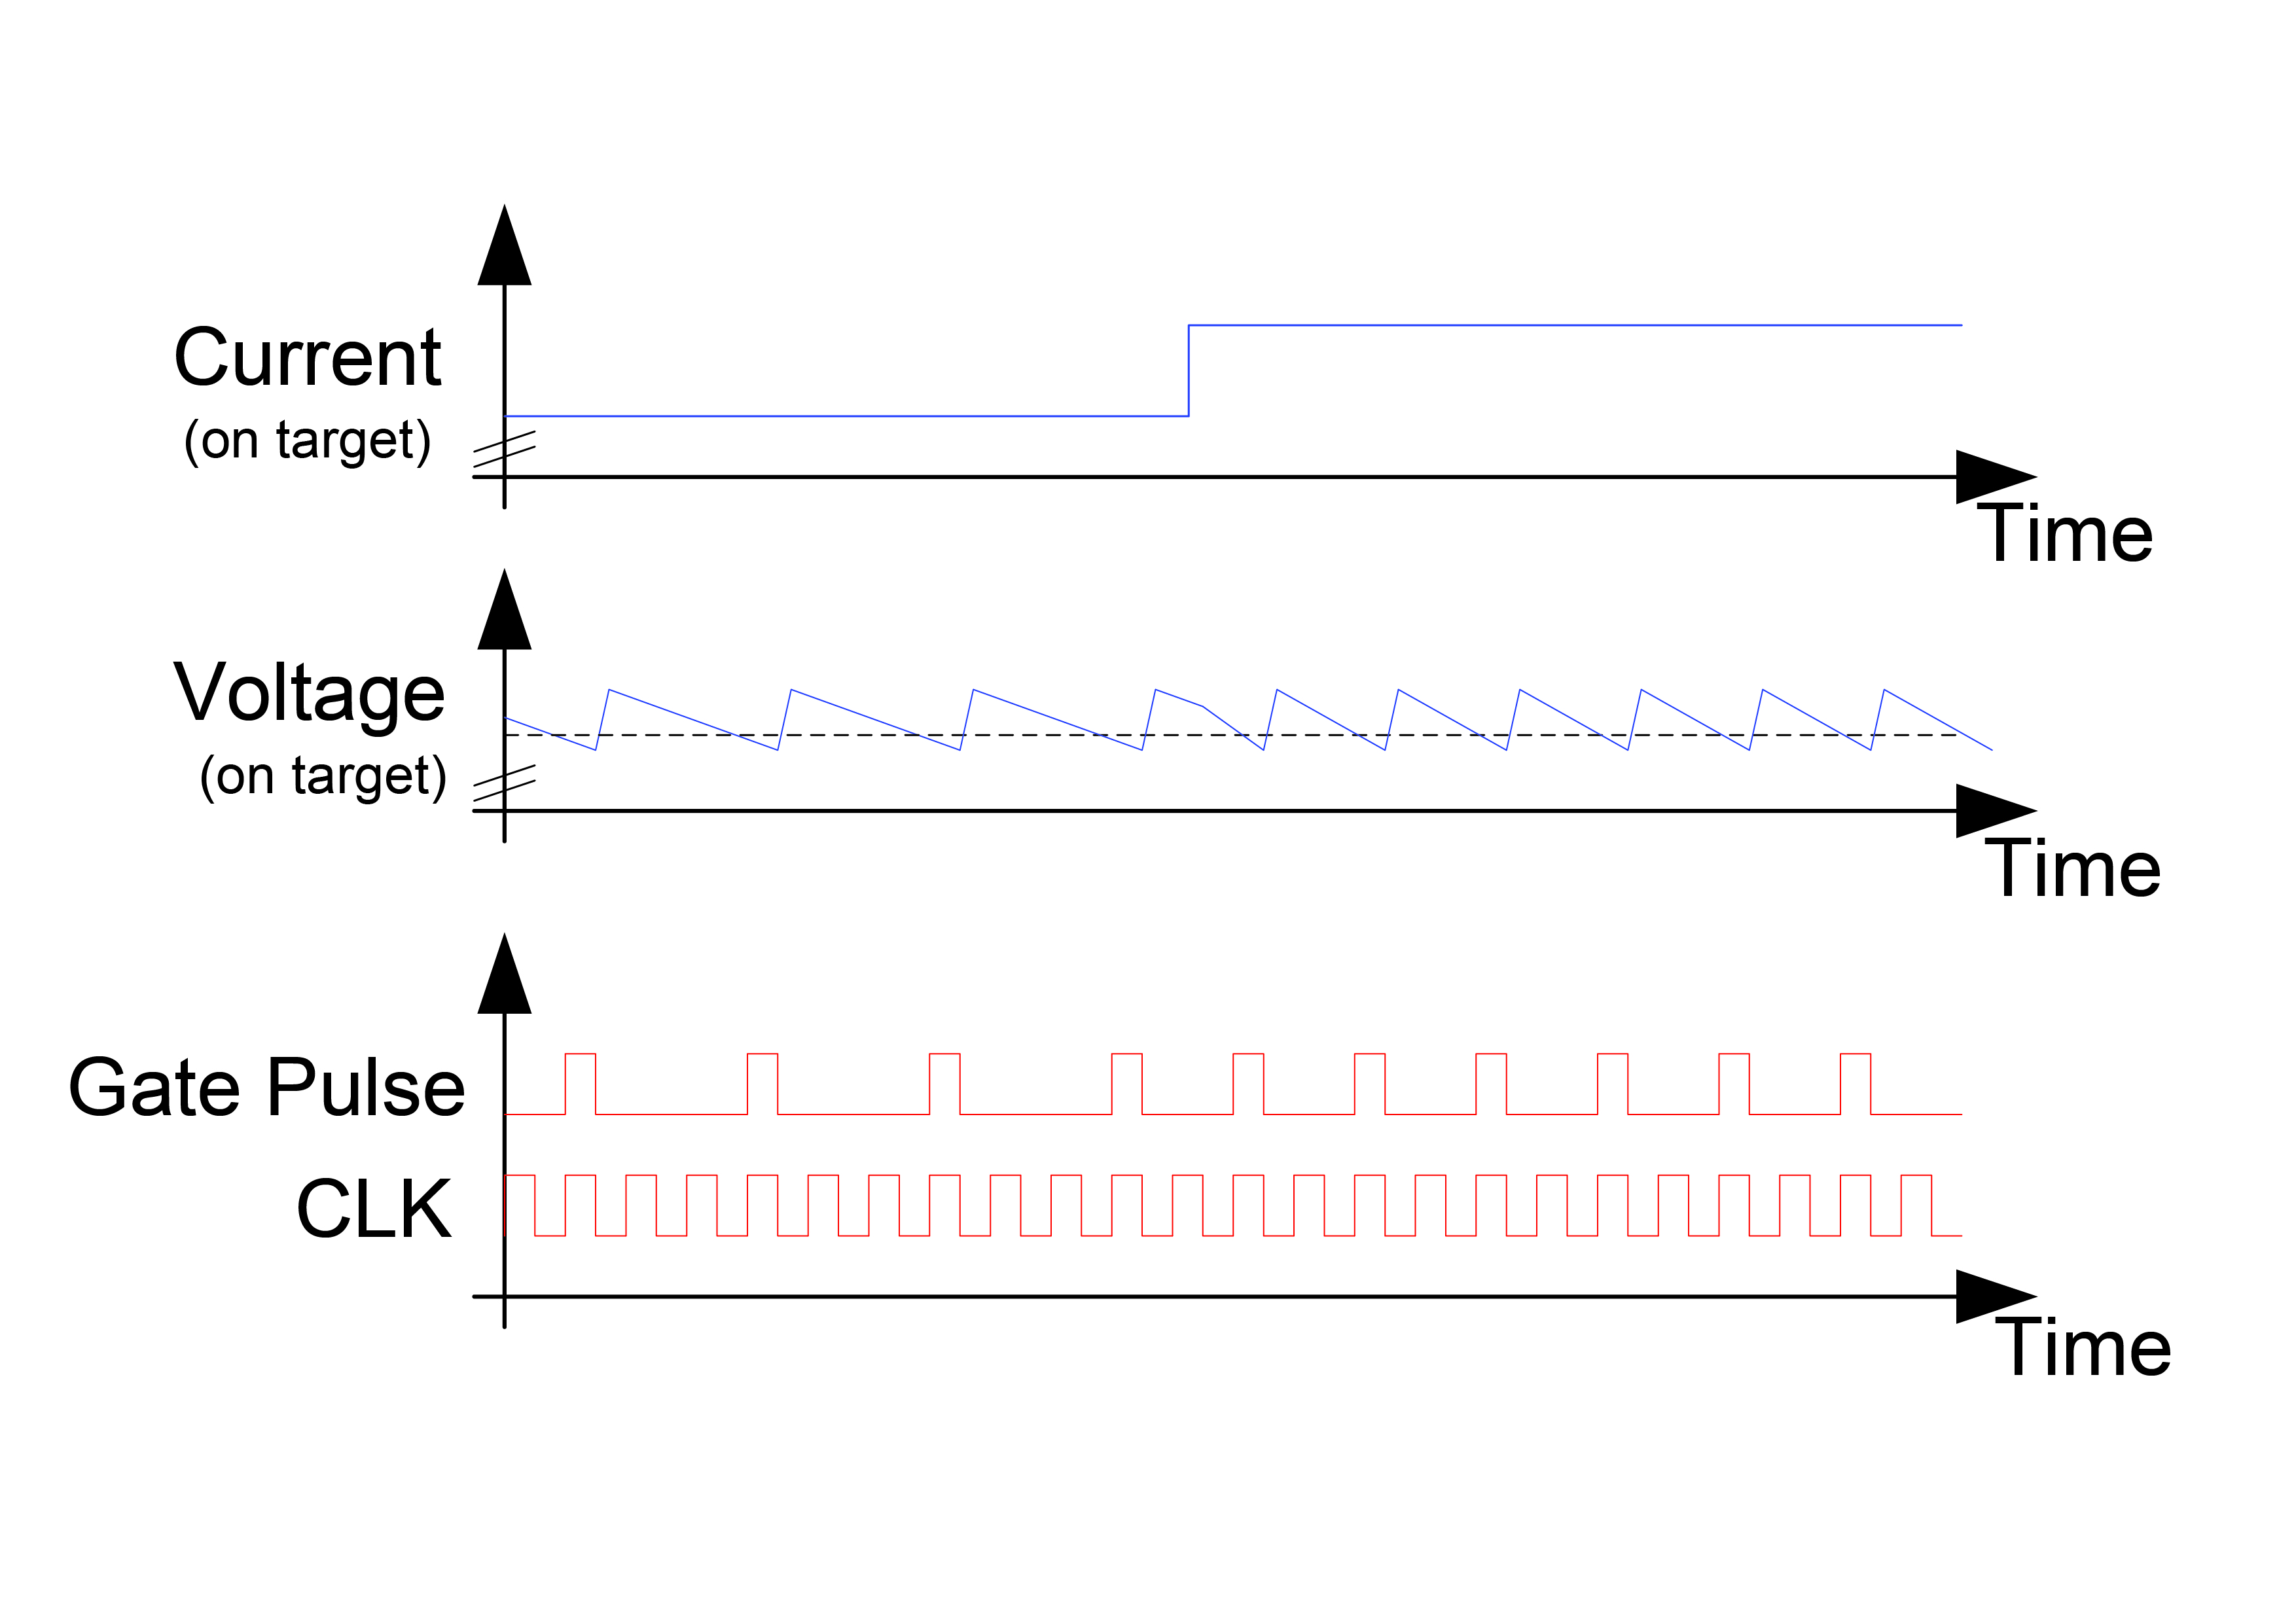 Figure 2 - The circuit’s residual sawtooth-shaped ripple is no issue. The switching frequency rises at a step change from a small current to a high current, resulting in a minor ripple reduction.